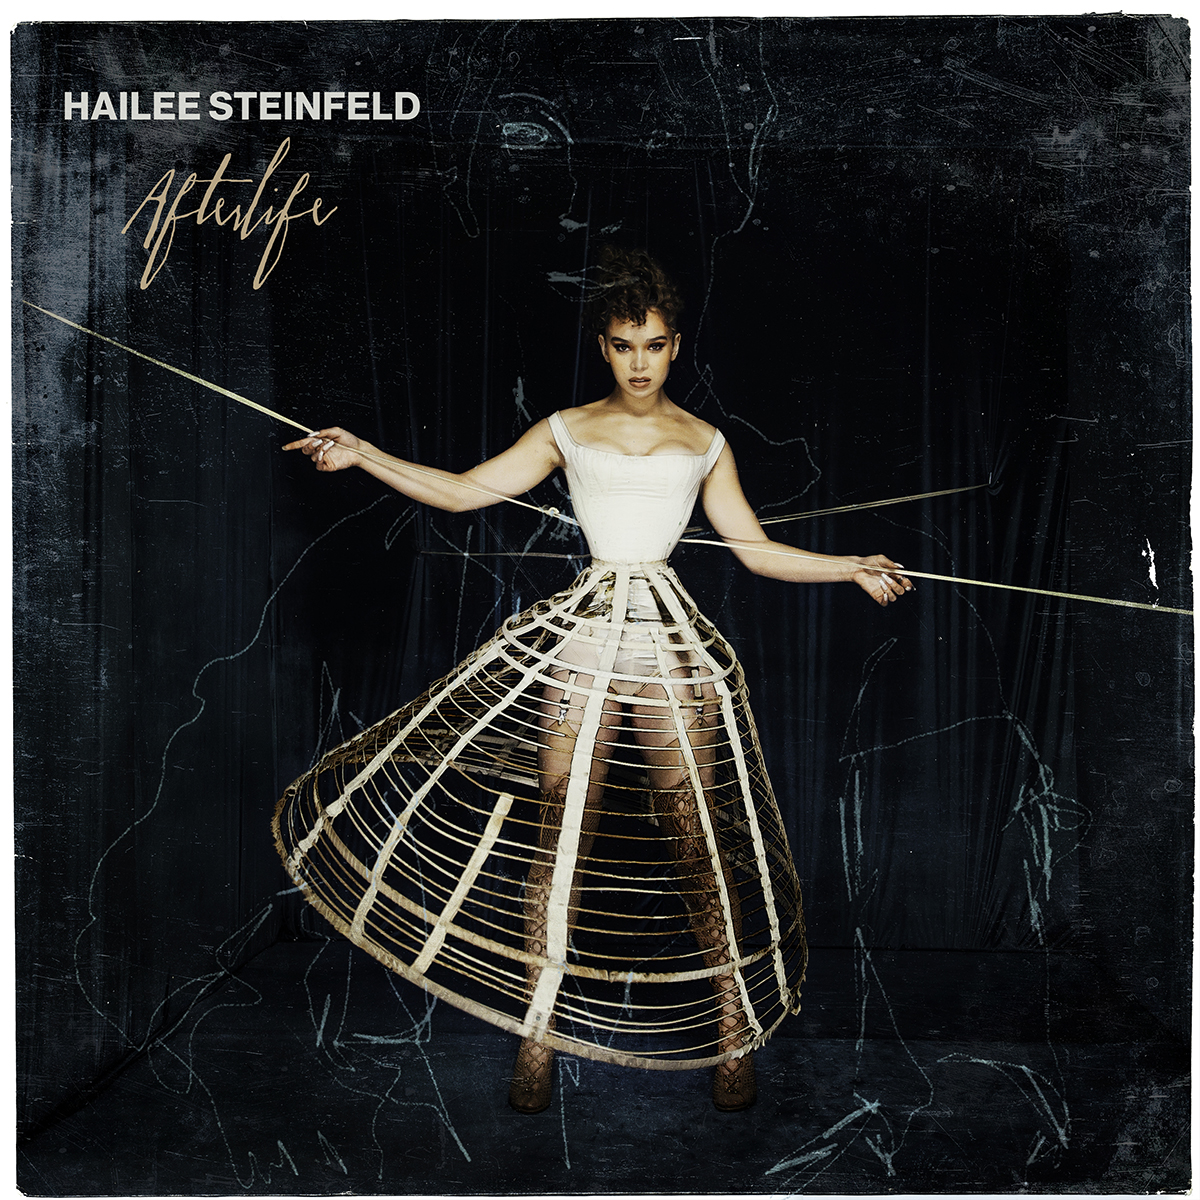 HAILEE STEINFELD AFTERLIFE ALBUM COVER